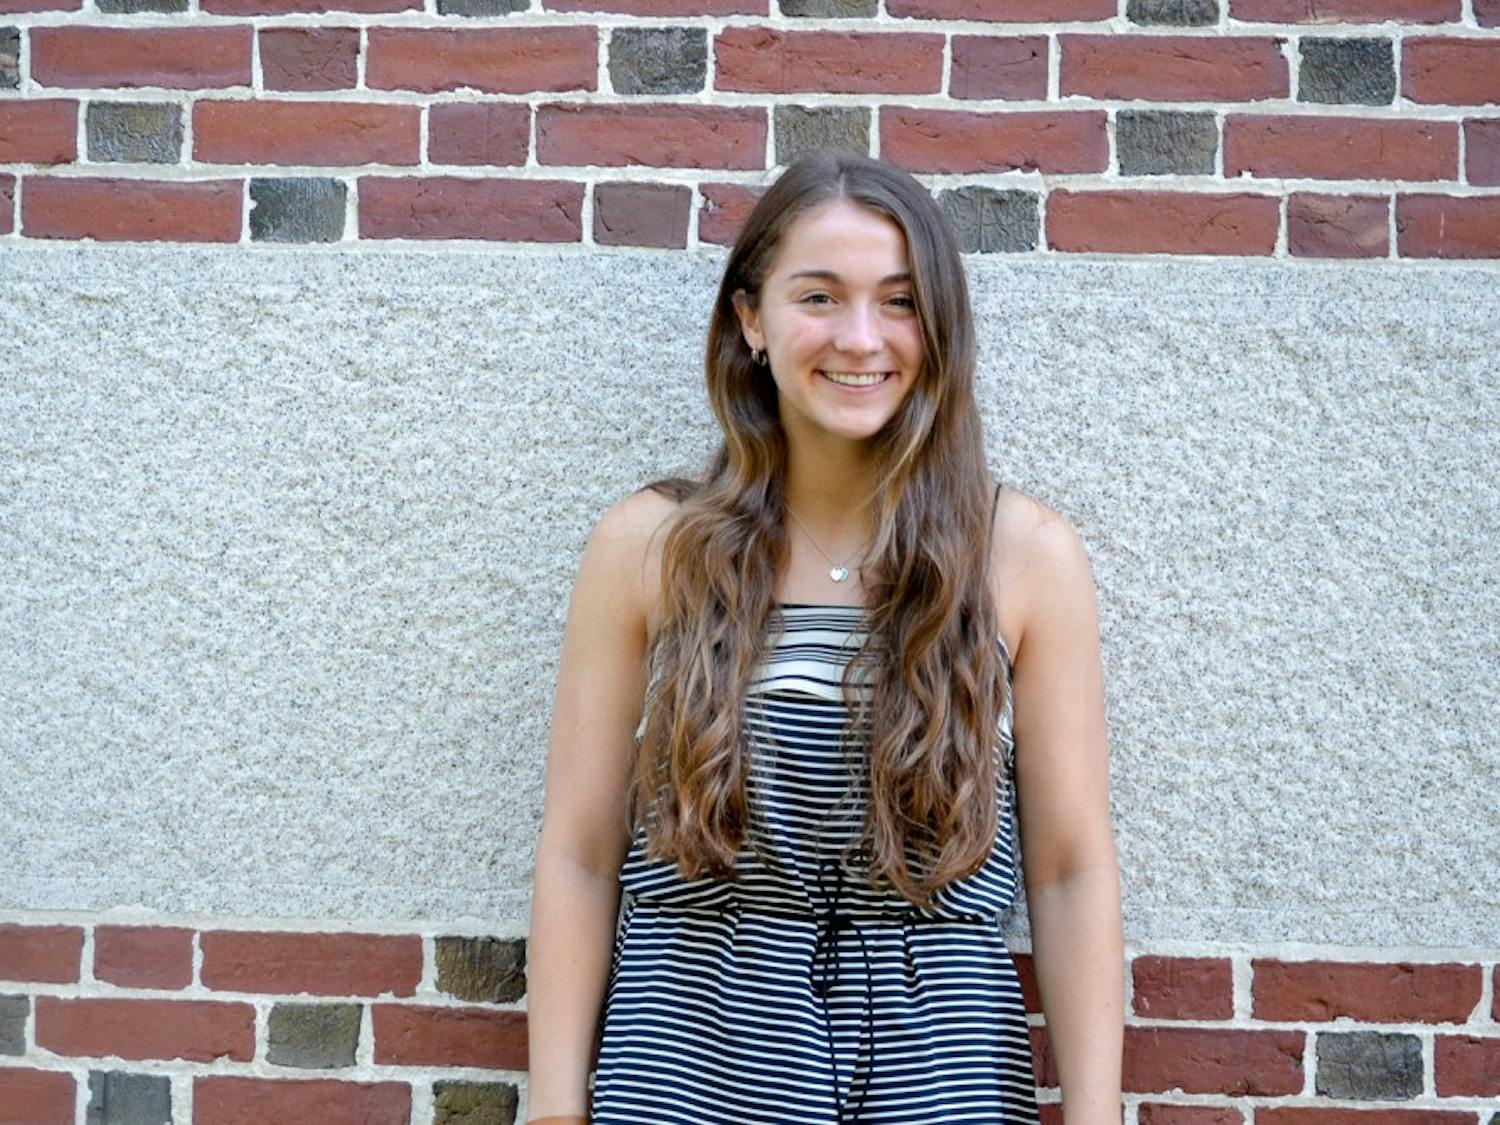 Julianna Docking '18 hopes to meet new people and try being uncomfortable during her next few years.